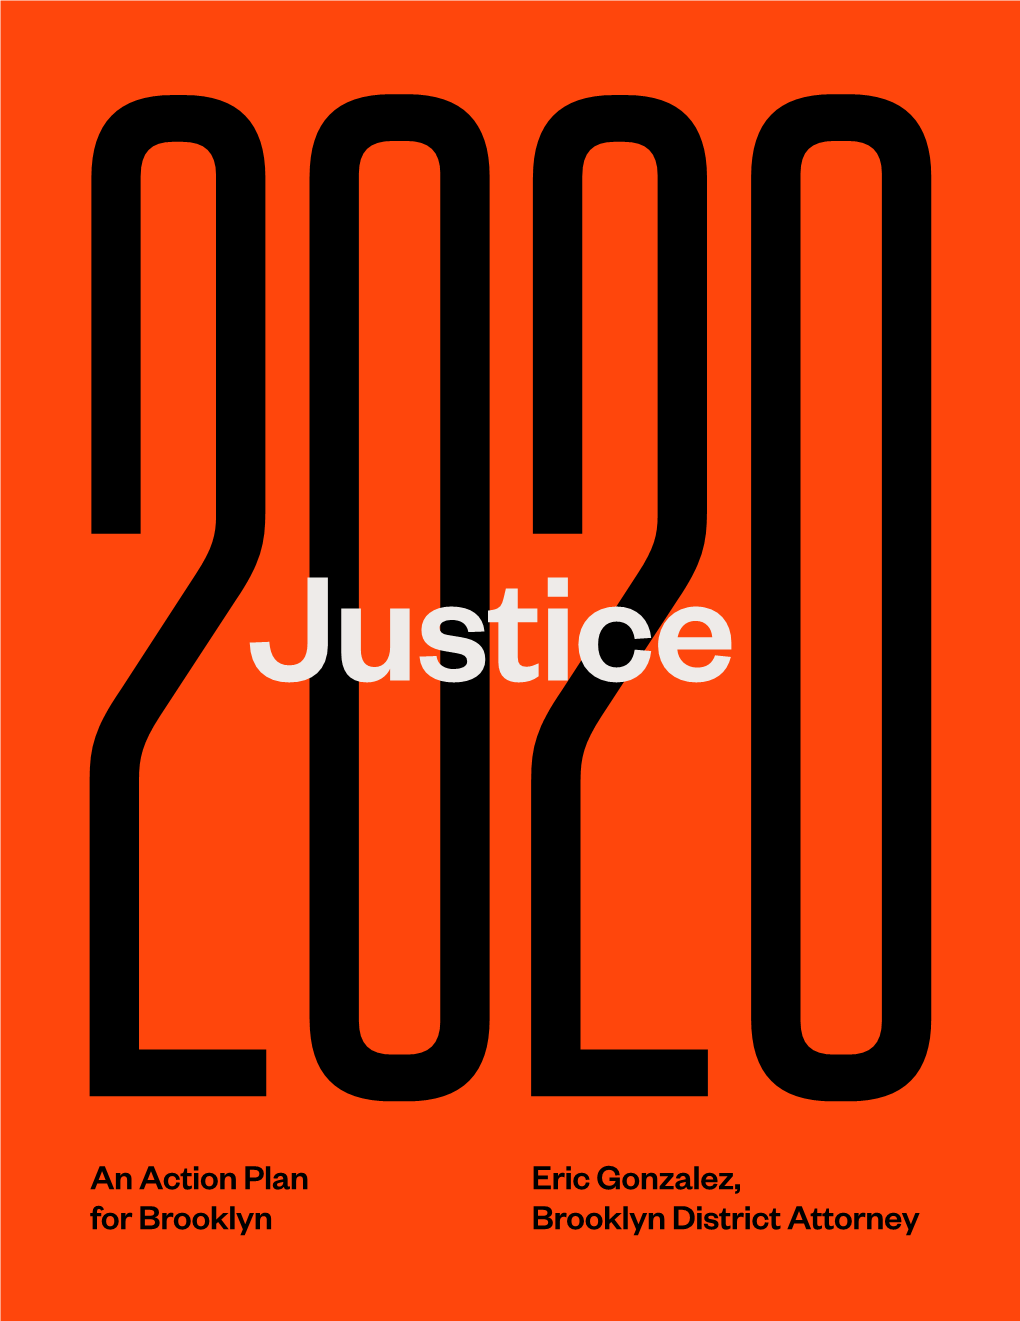 Read the Justice 2020 Action Plan